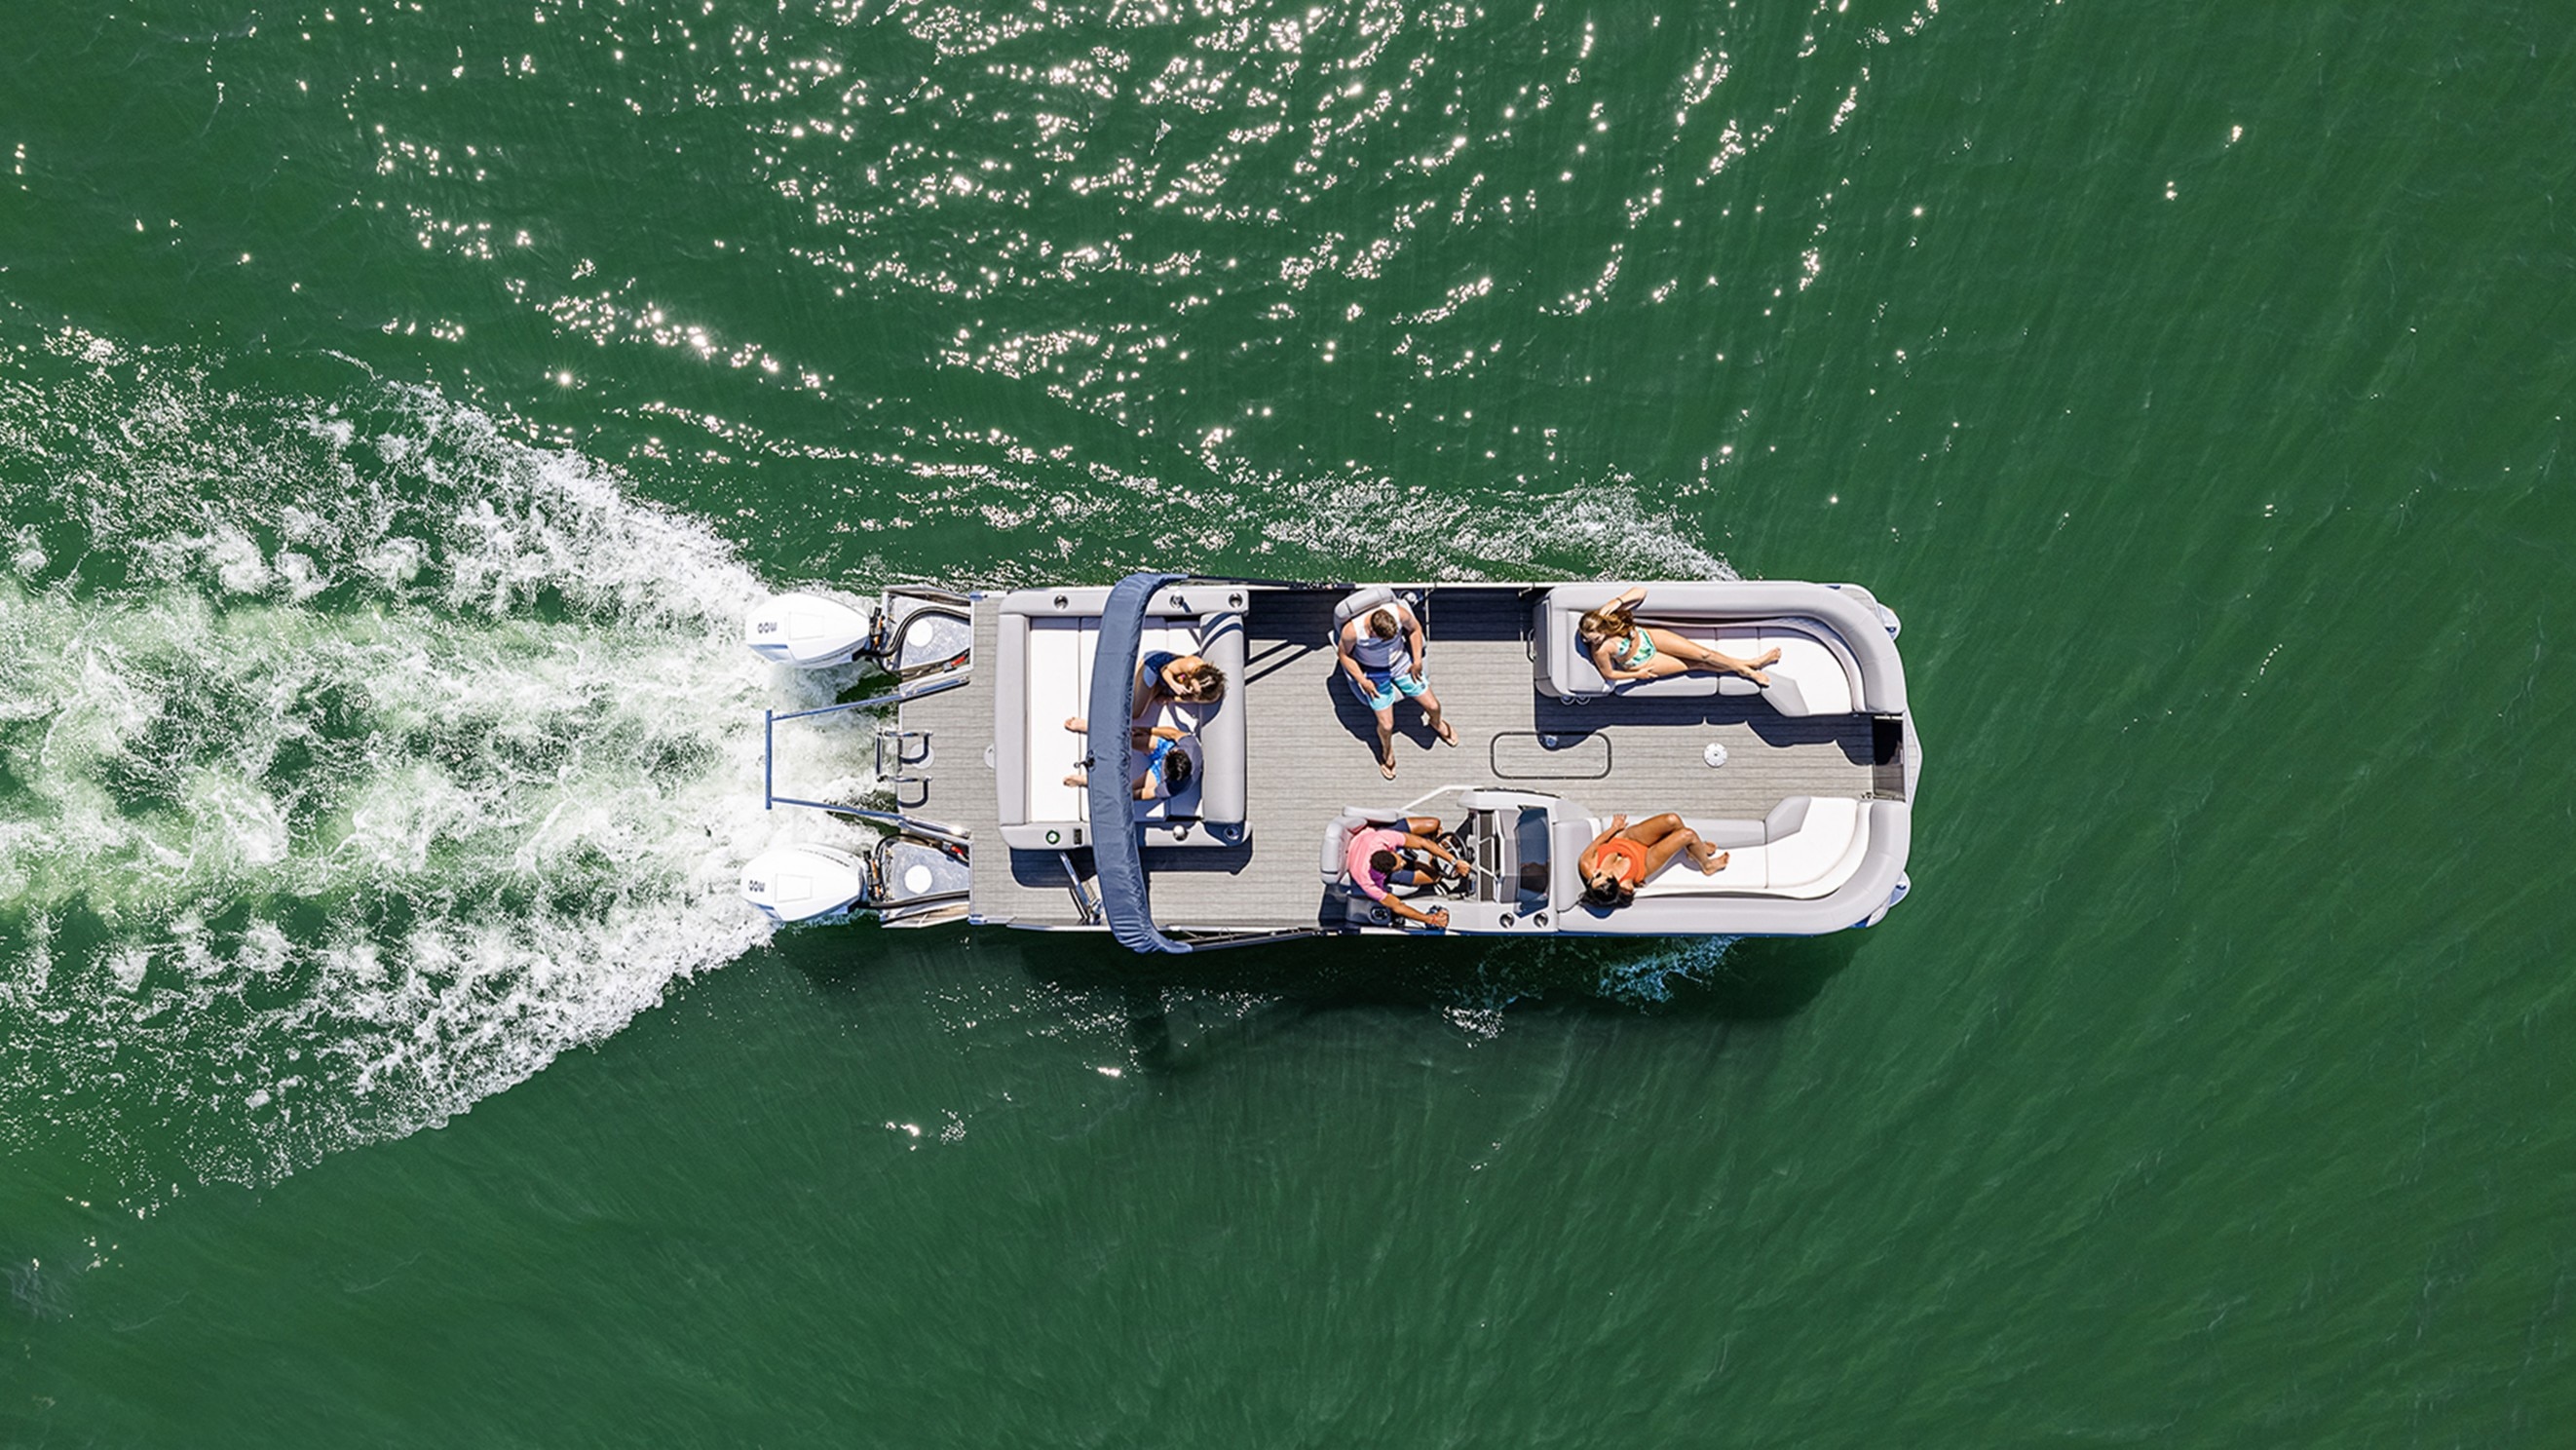 Top view of friends in a Manitou Pontoon Boat